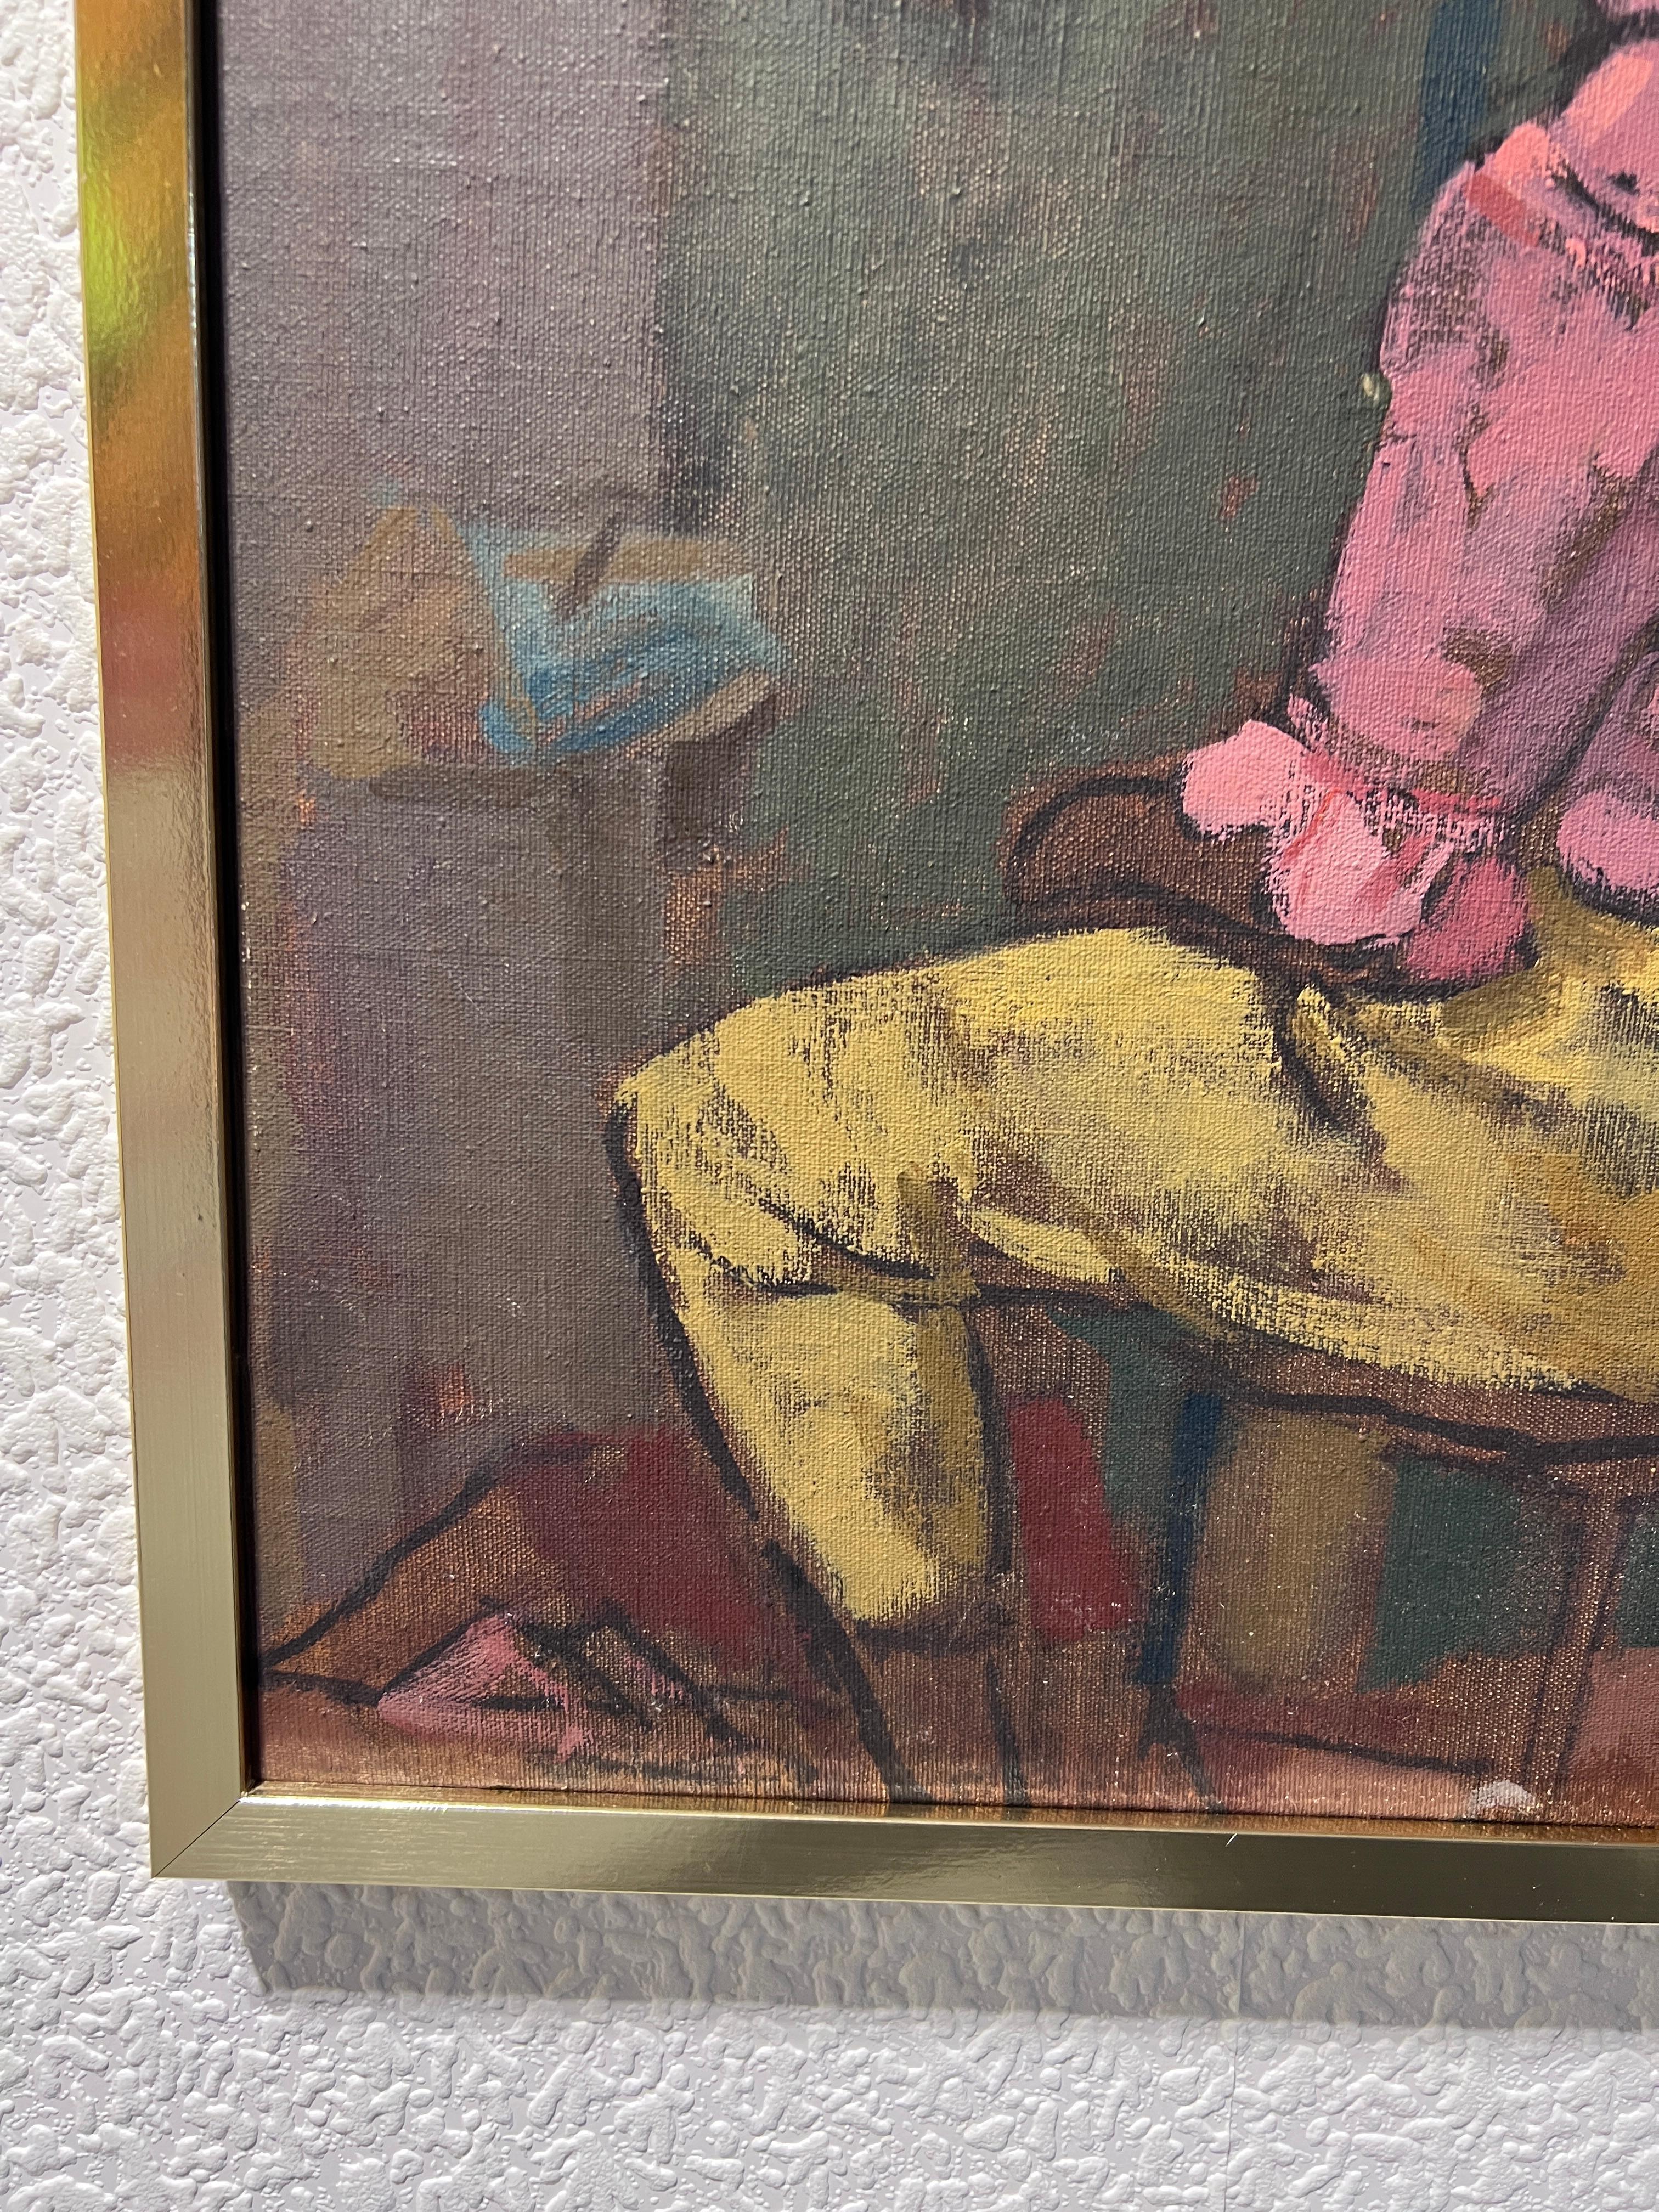 This is a one-on-kind vintage oil painting on canvas depicting two figures.

Presented in a nice gold frame  The painting is in good vintage condition. Please see the photos.

Measures framed  37.5